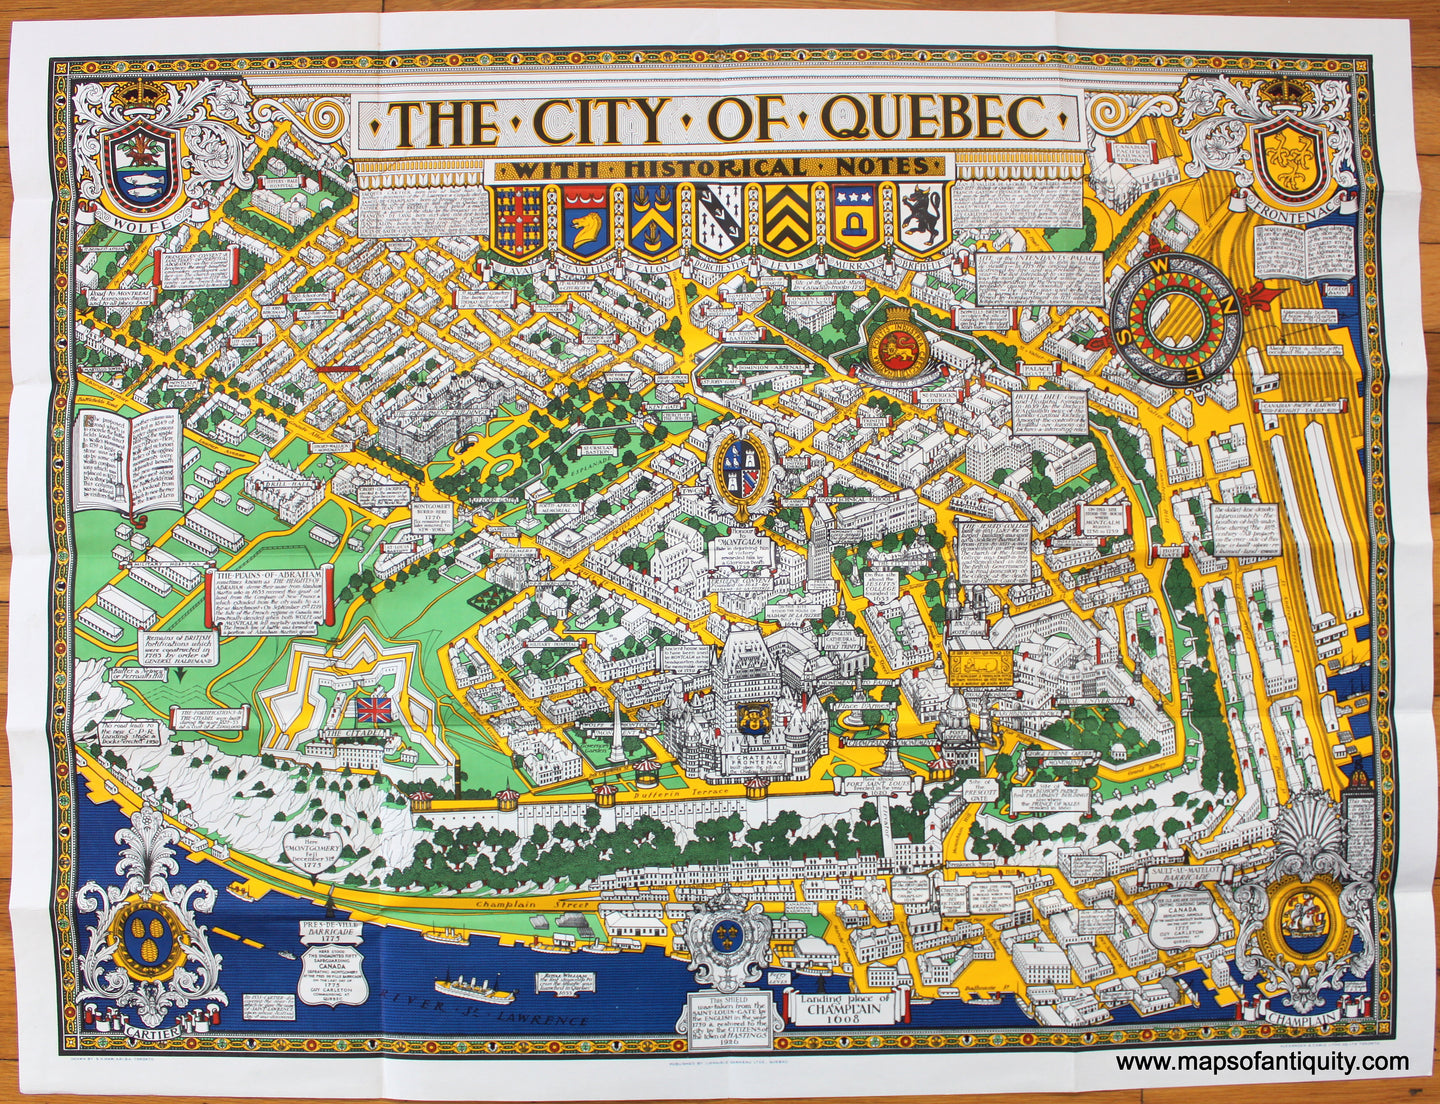 Antique-Printed-Color-Pictorial-Map-Map-of-the-City-of-Quebec-with-Historical-Notes-1932-S.H.-Maw-Librairie-Garneau-Ltee-Canada-1930s-1900s-20th-century-Maps-of-Antiquity